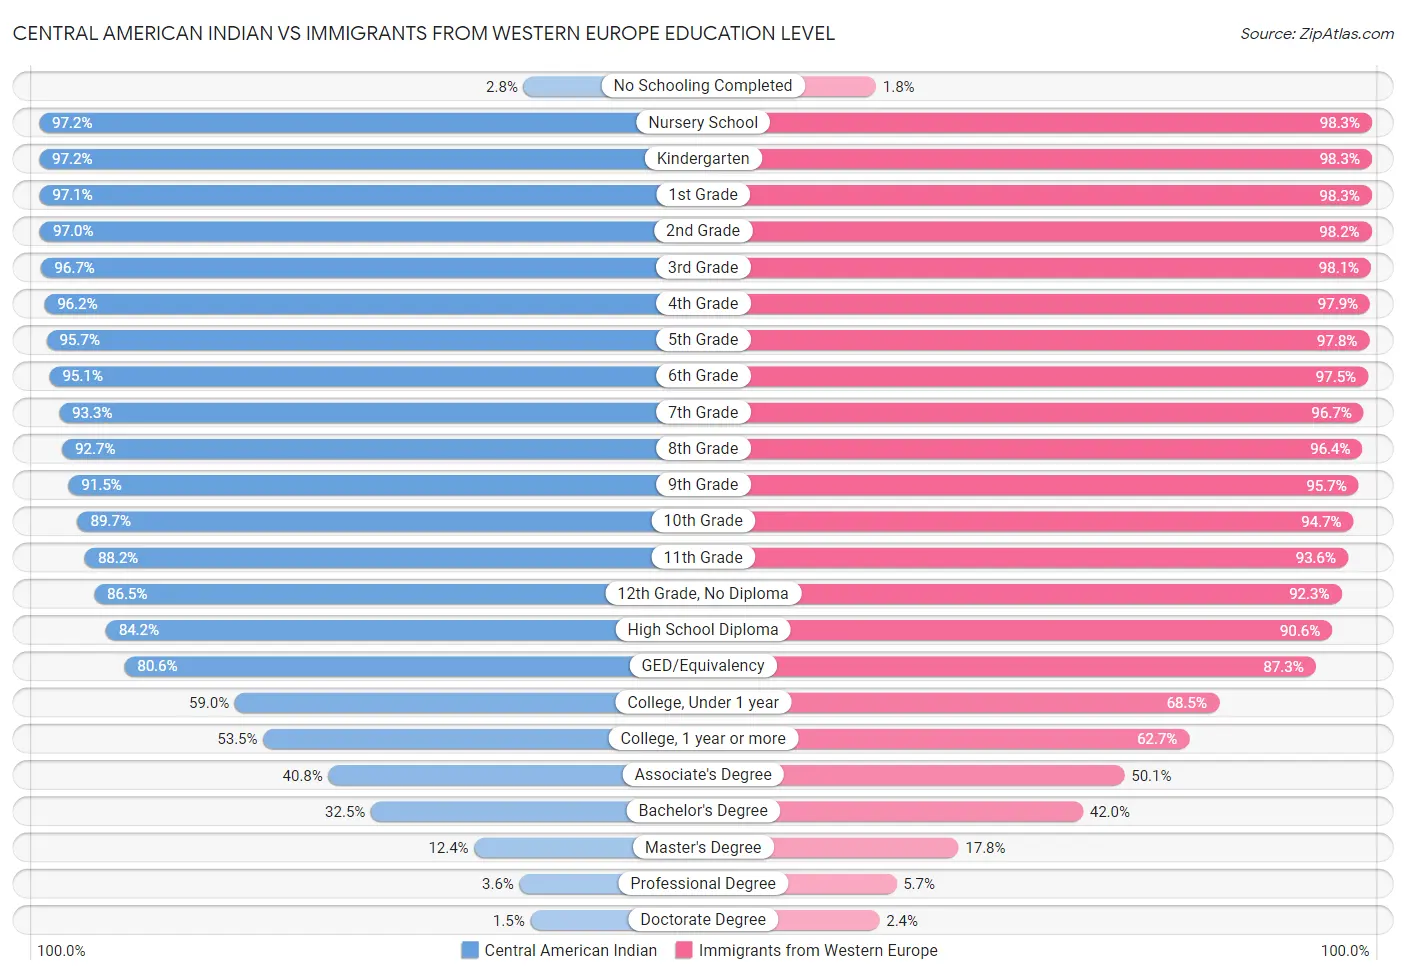 Central American Indian vs Immigrants from Western Europe Education Level